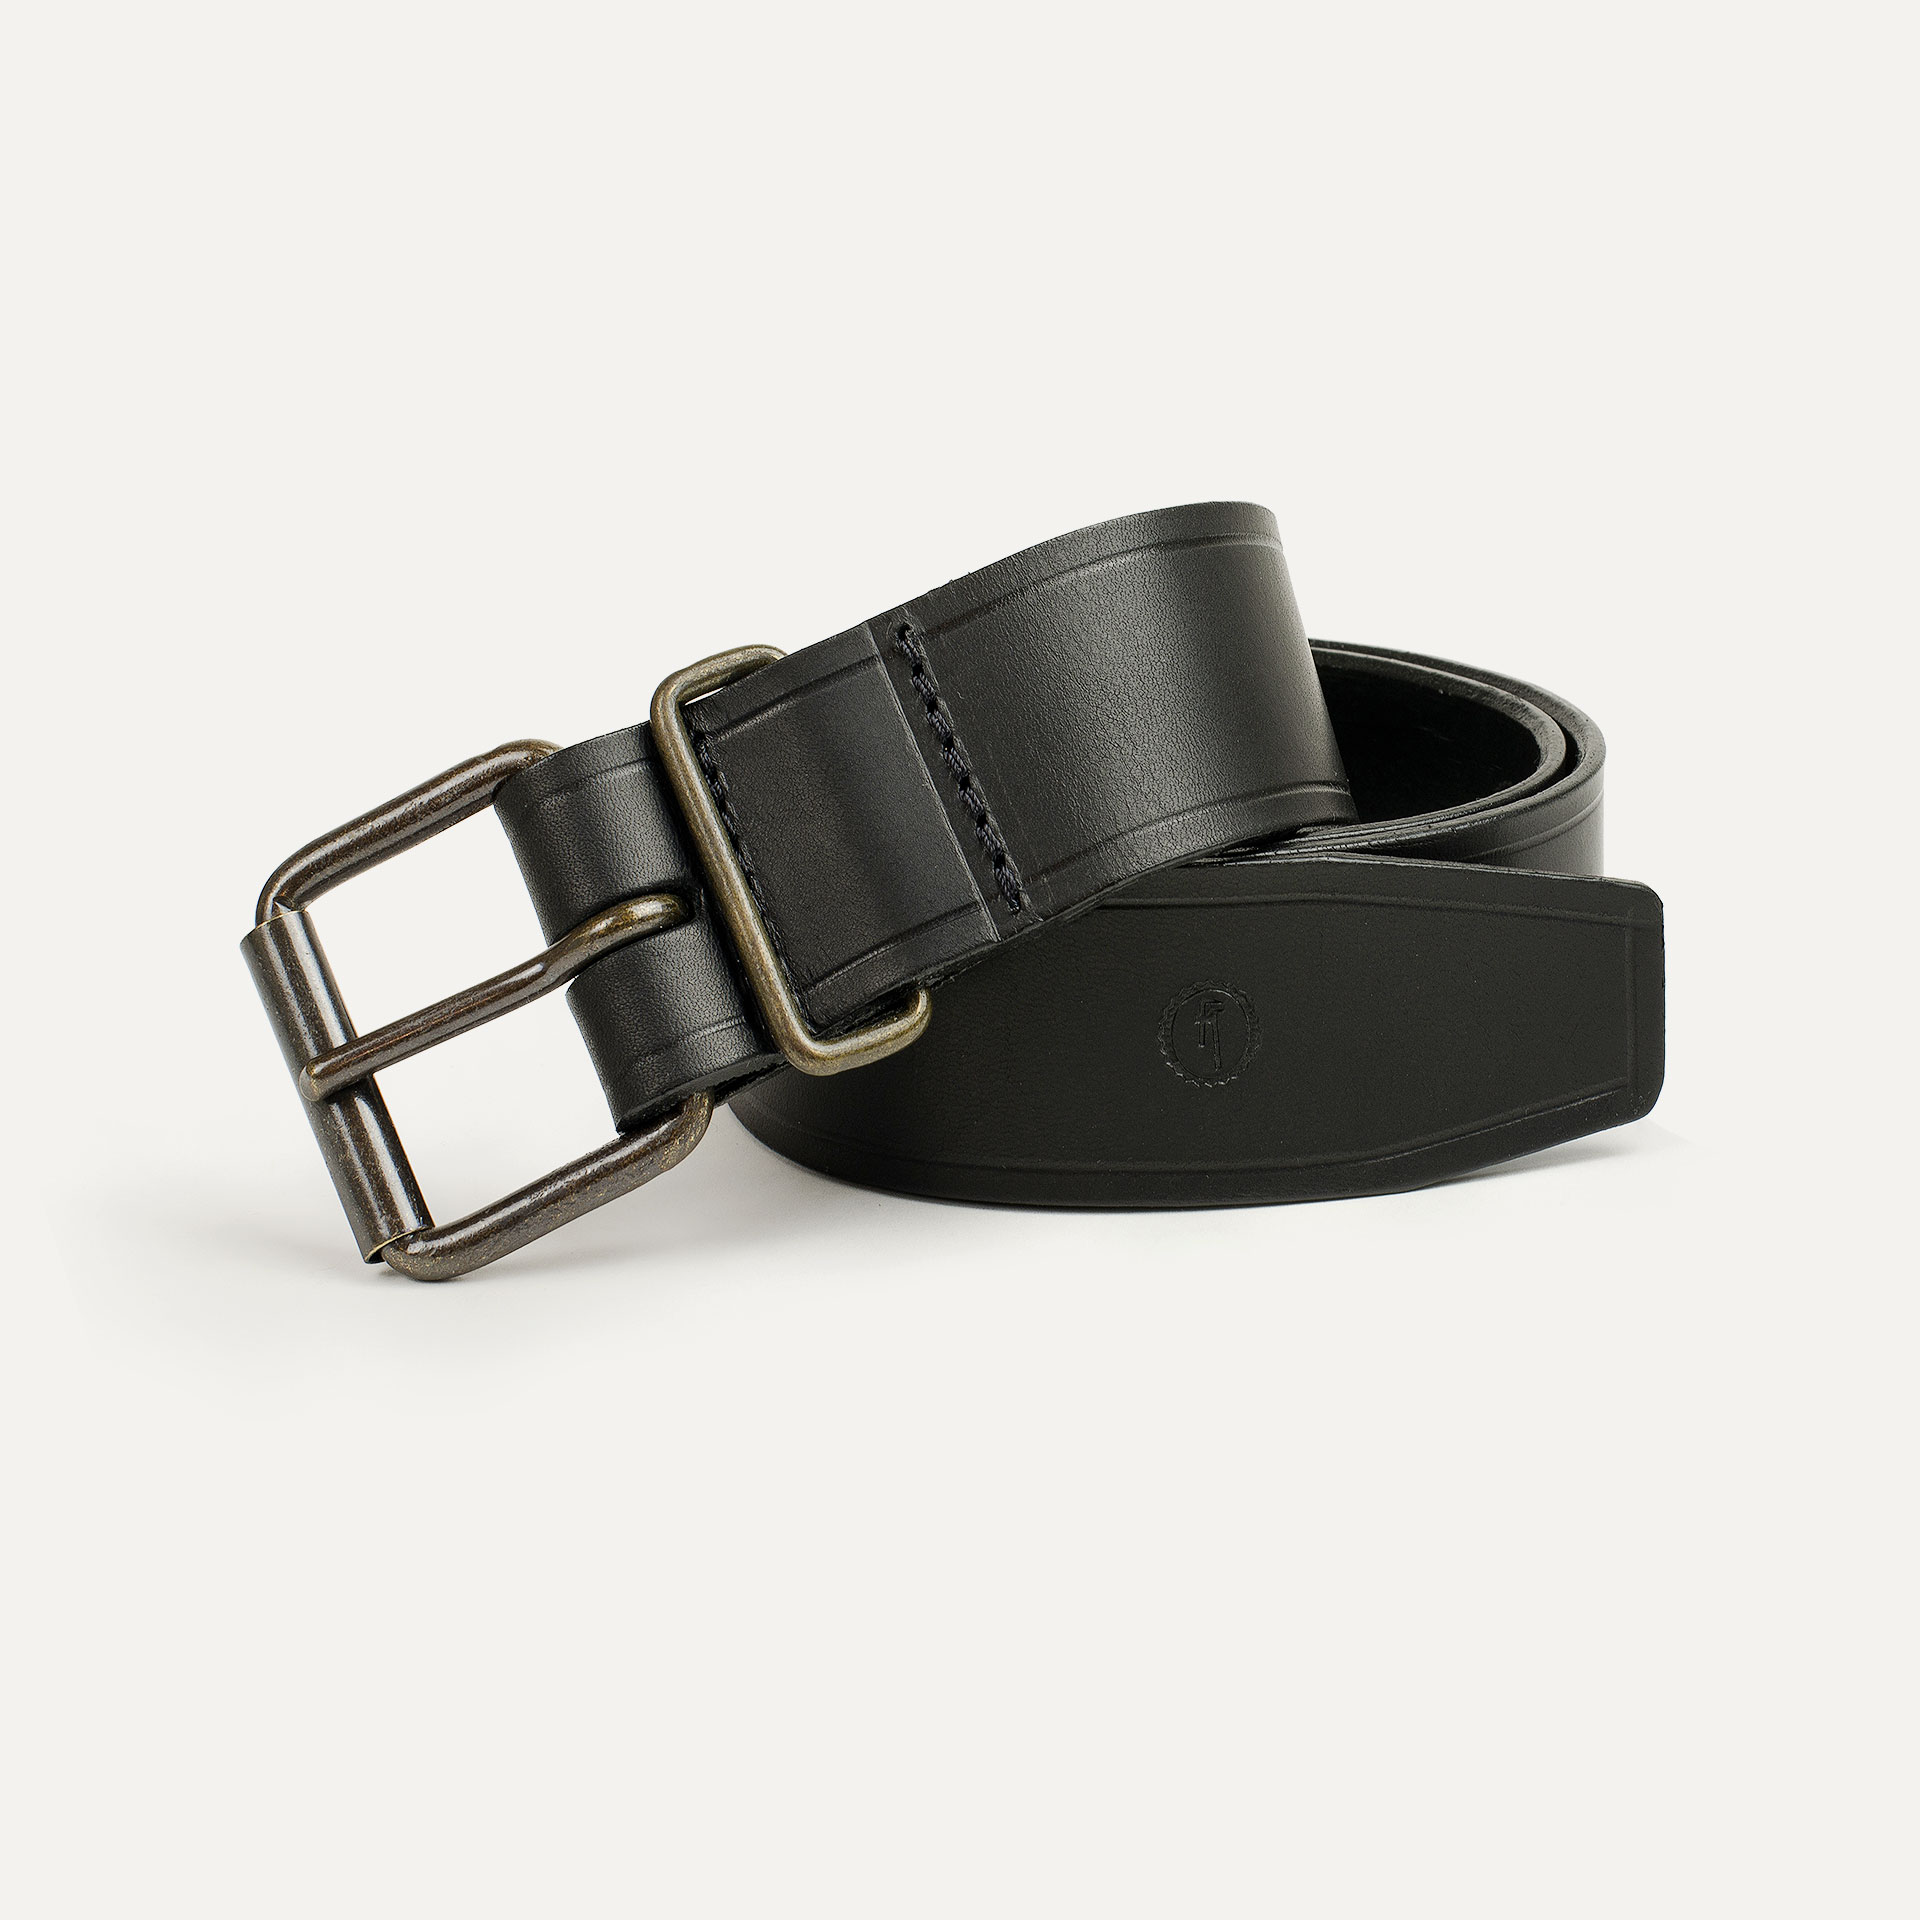 Fred leather belt